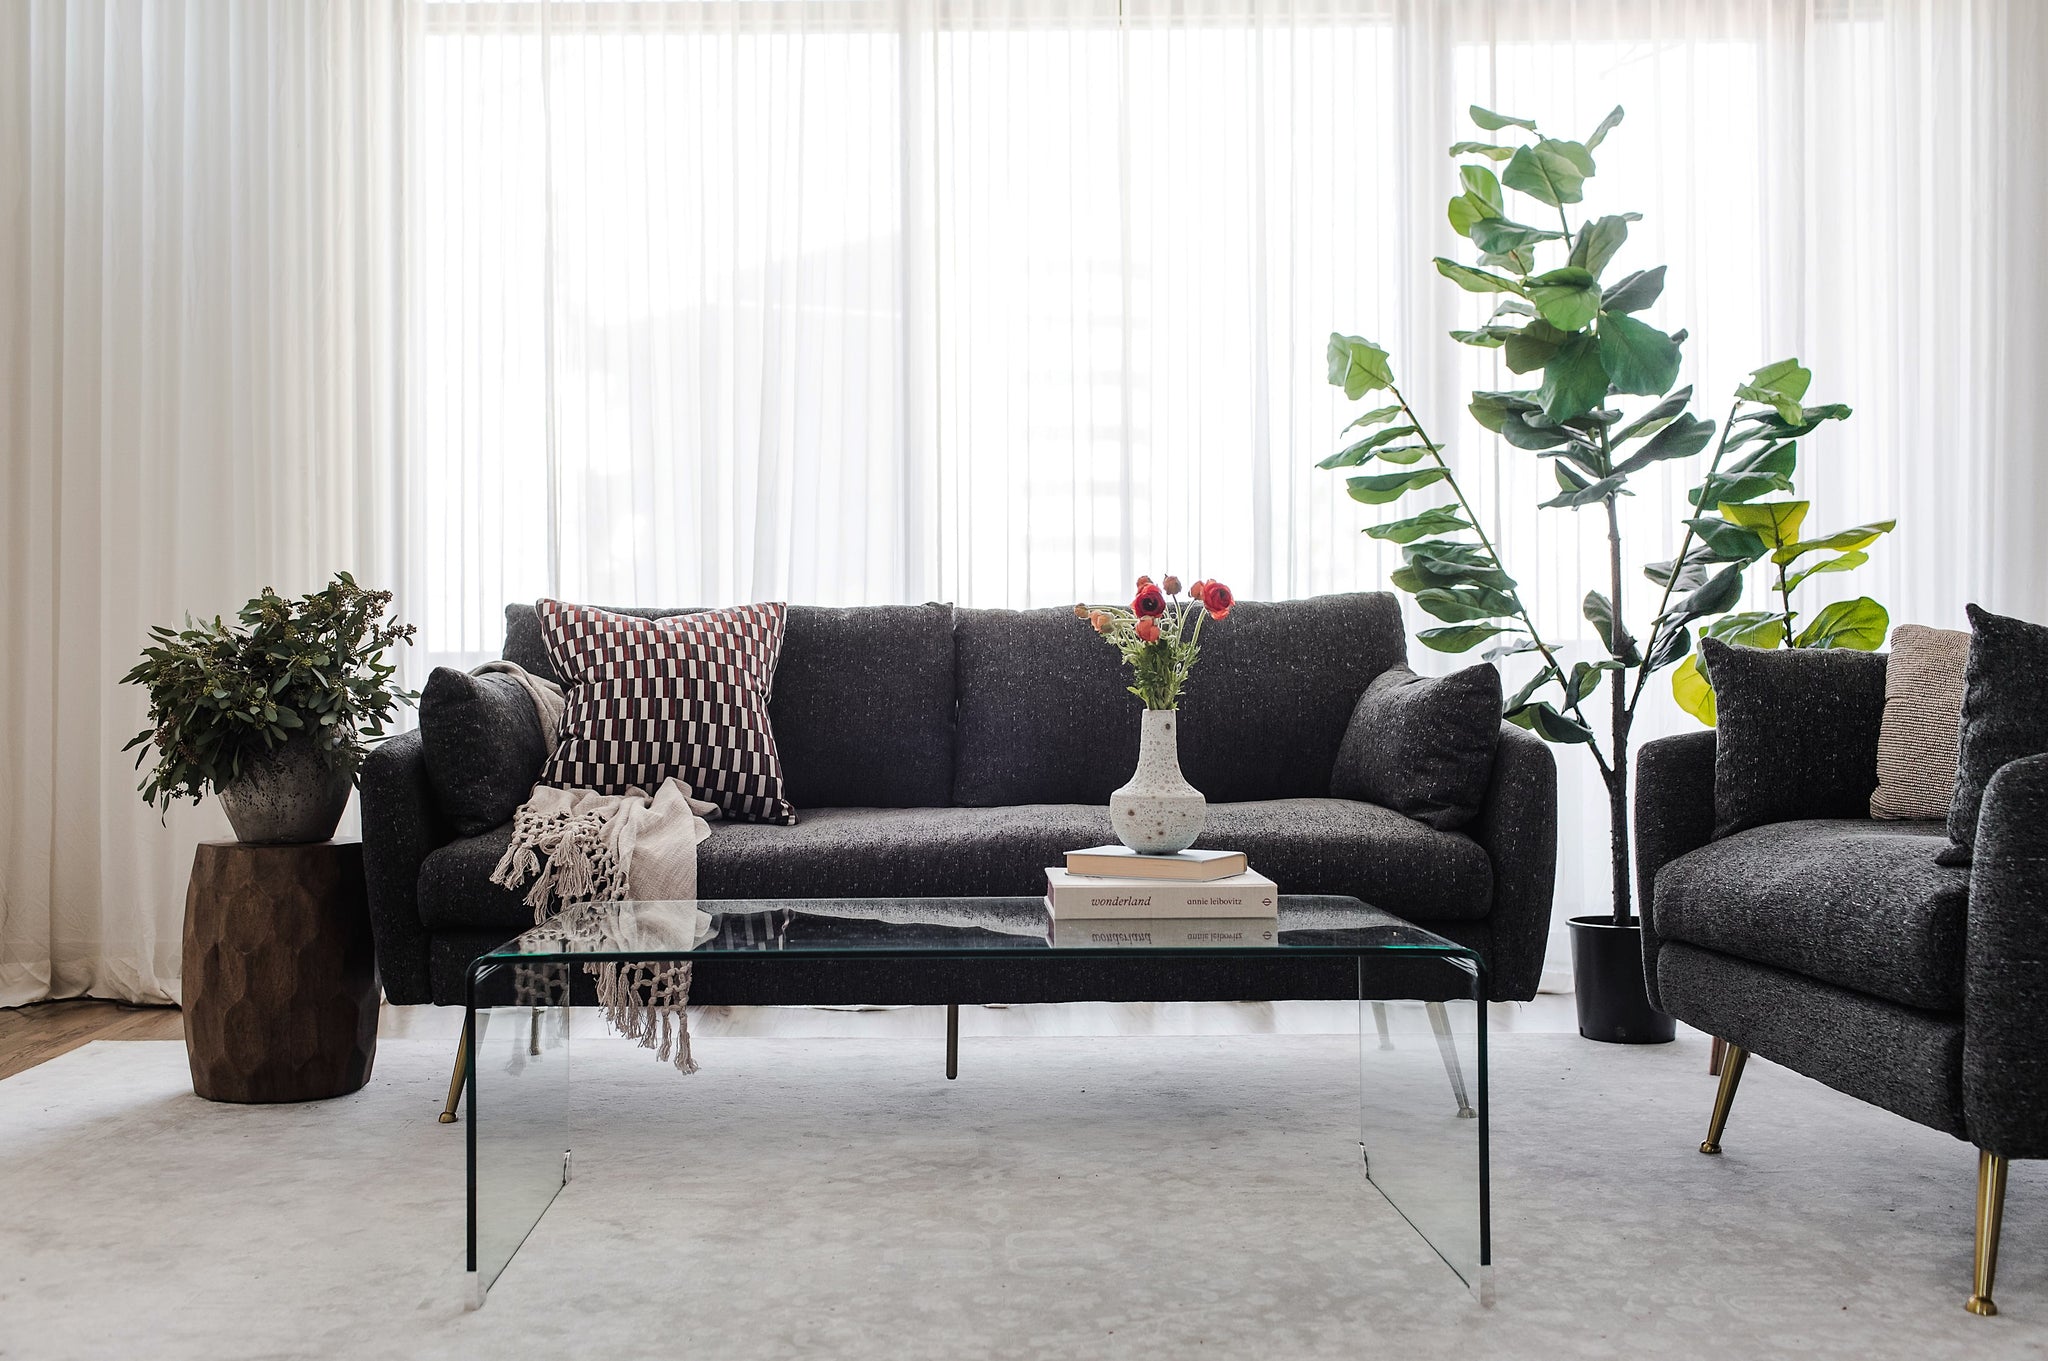 park sofa shown in charcoal with gold legs